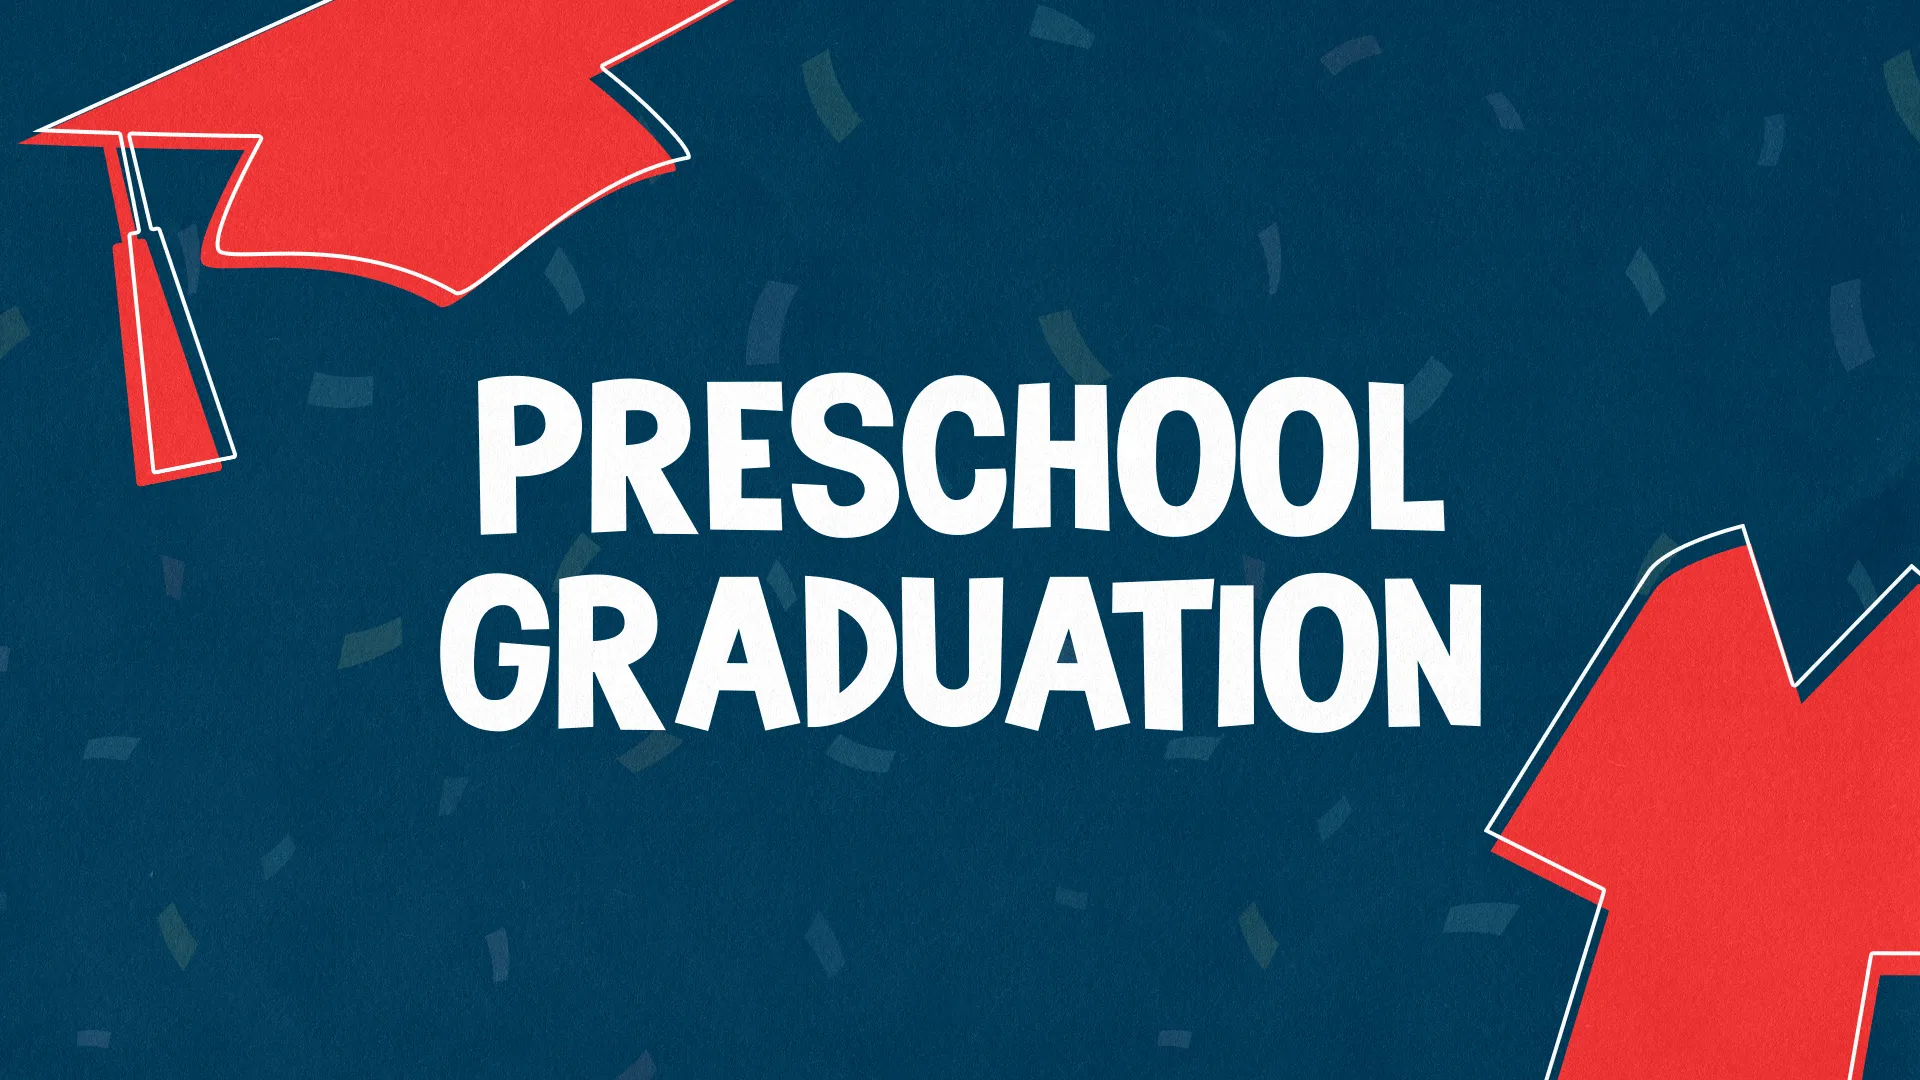 Celebrate The Little Graduates With This Cheerful And Vibrant Graphic For Preschool Graduation. Designed To Capture The Joy And Pride Of This Special Milestone, It'S Perfect For Your Church'S Children'S Ministry Events.